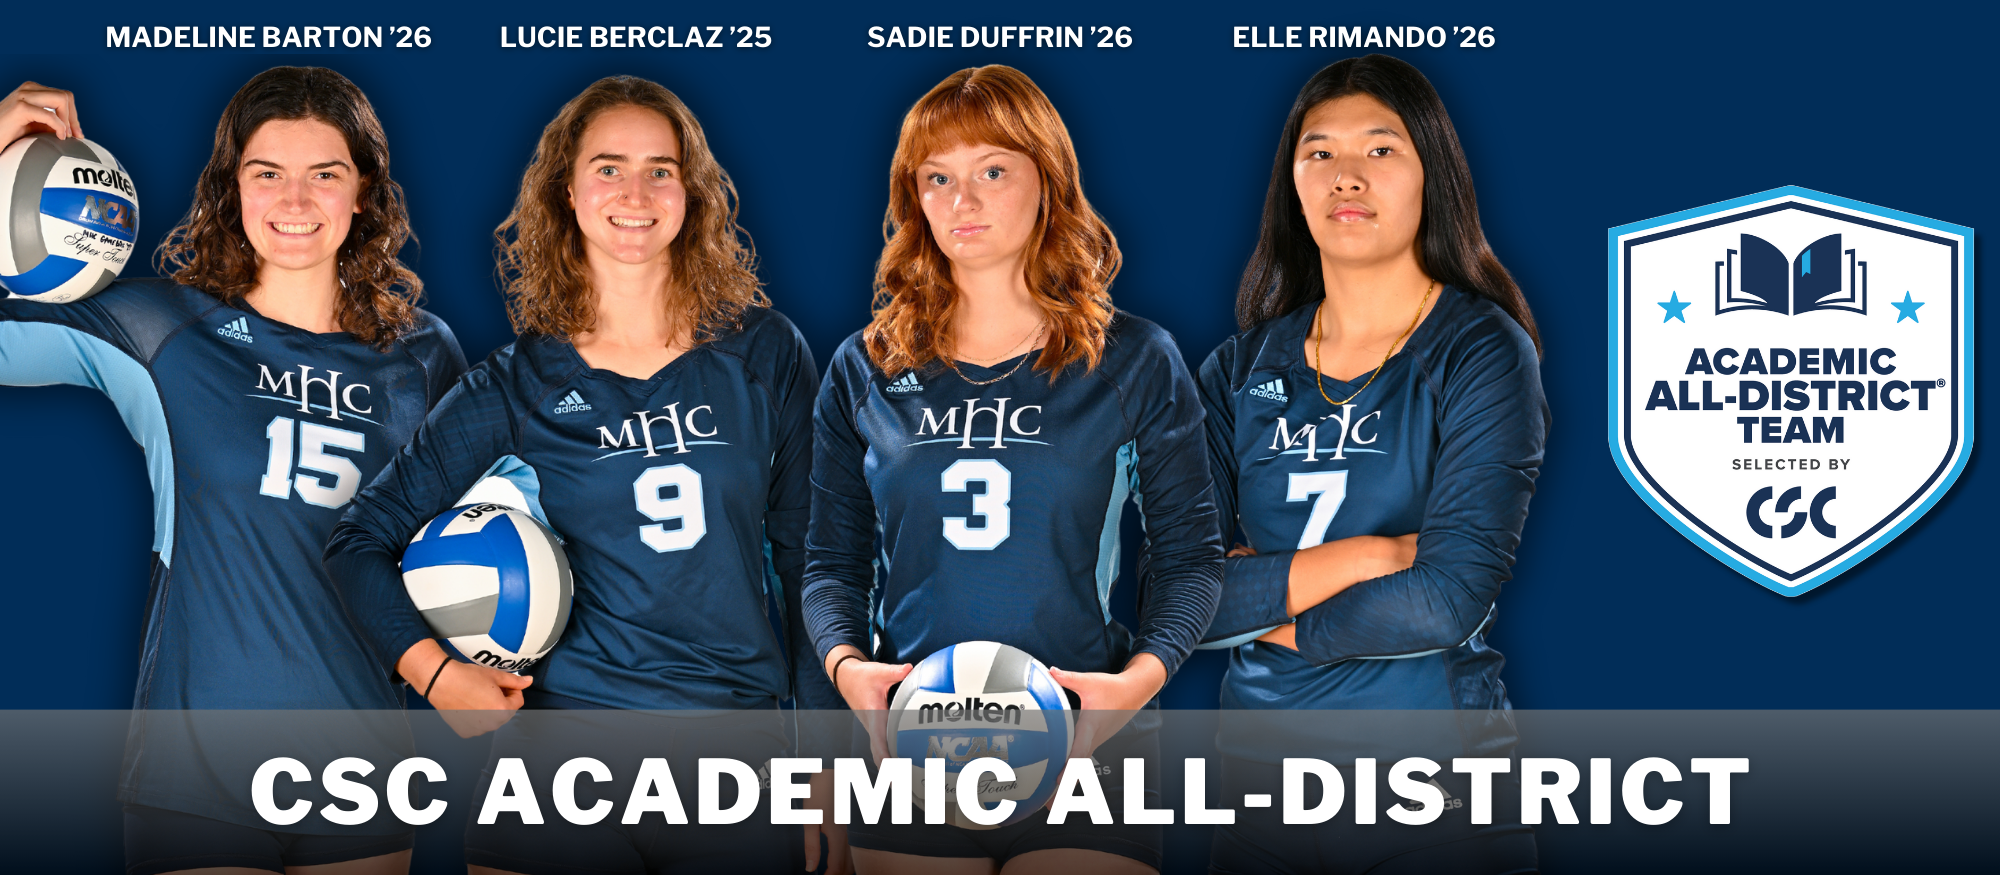 Volleyball sees the maximum of four players earn CSC Academic All-District honors